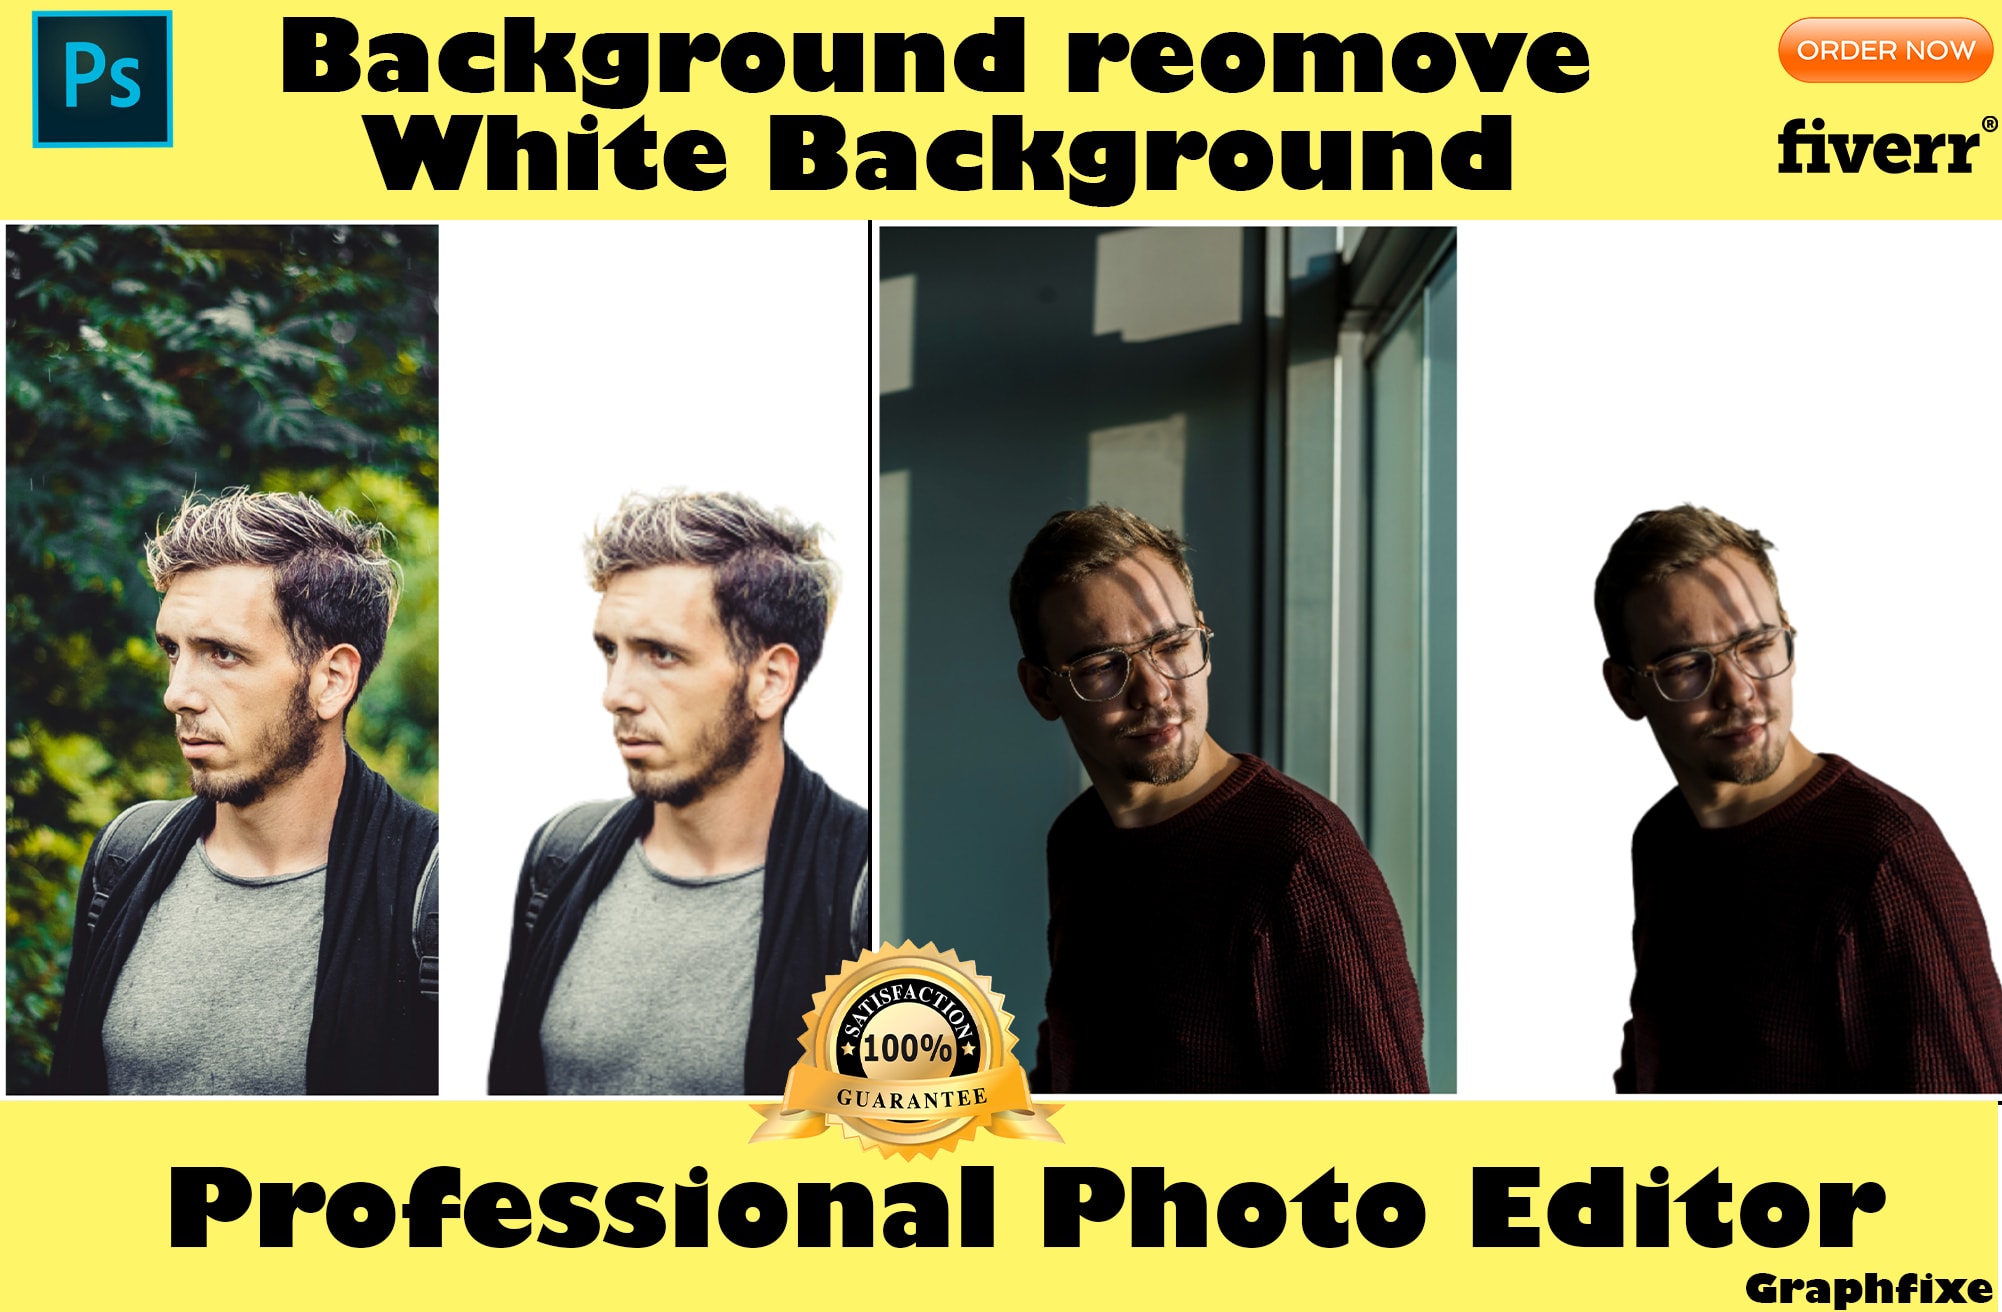 Do photoshop editing remove background face swap by Graphfixe | Fiverr